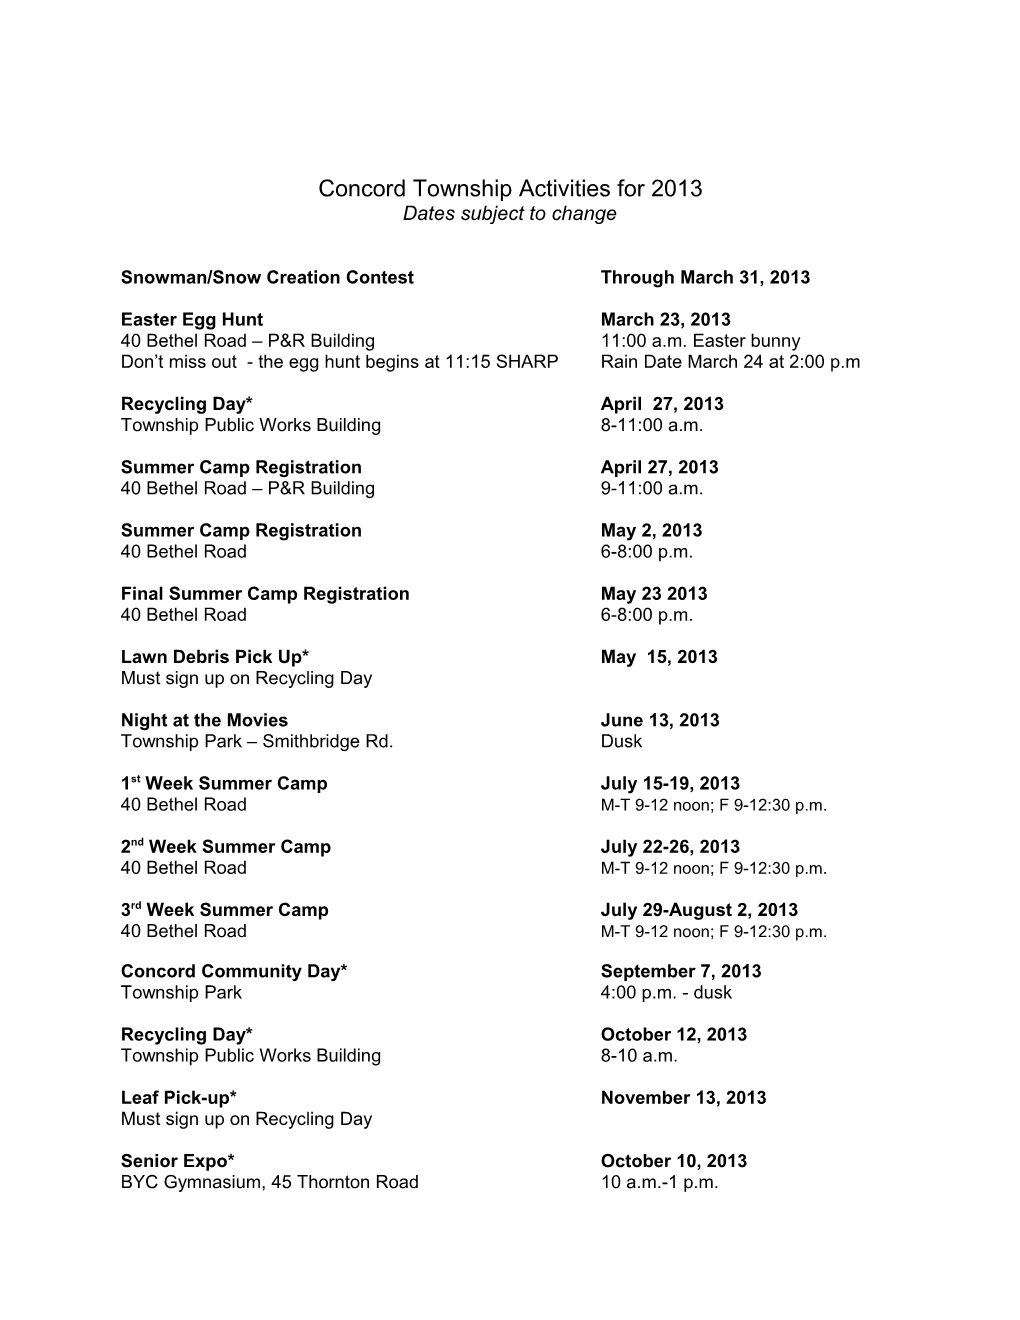 Concord Township Activities for 2008